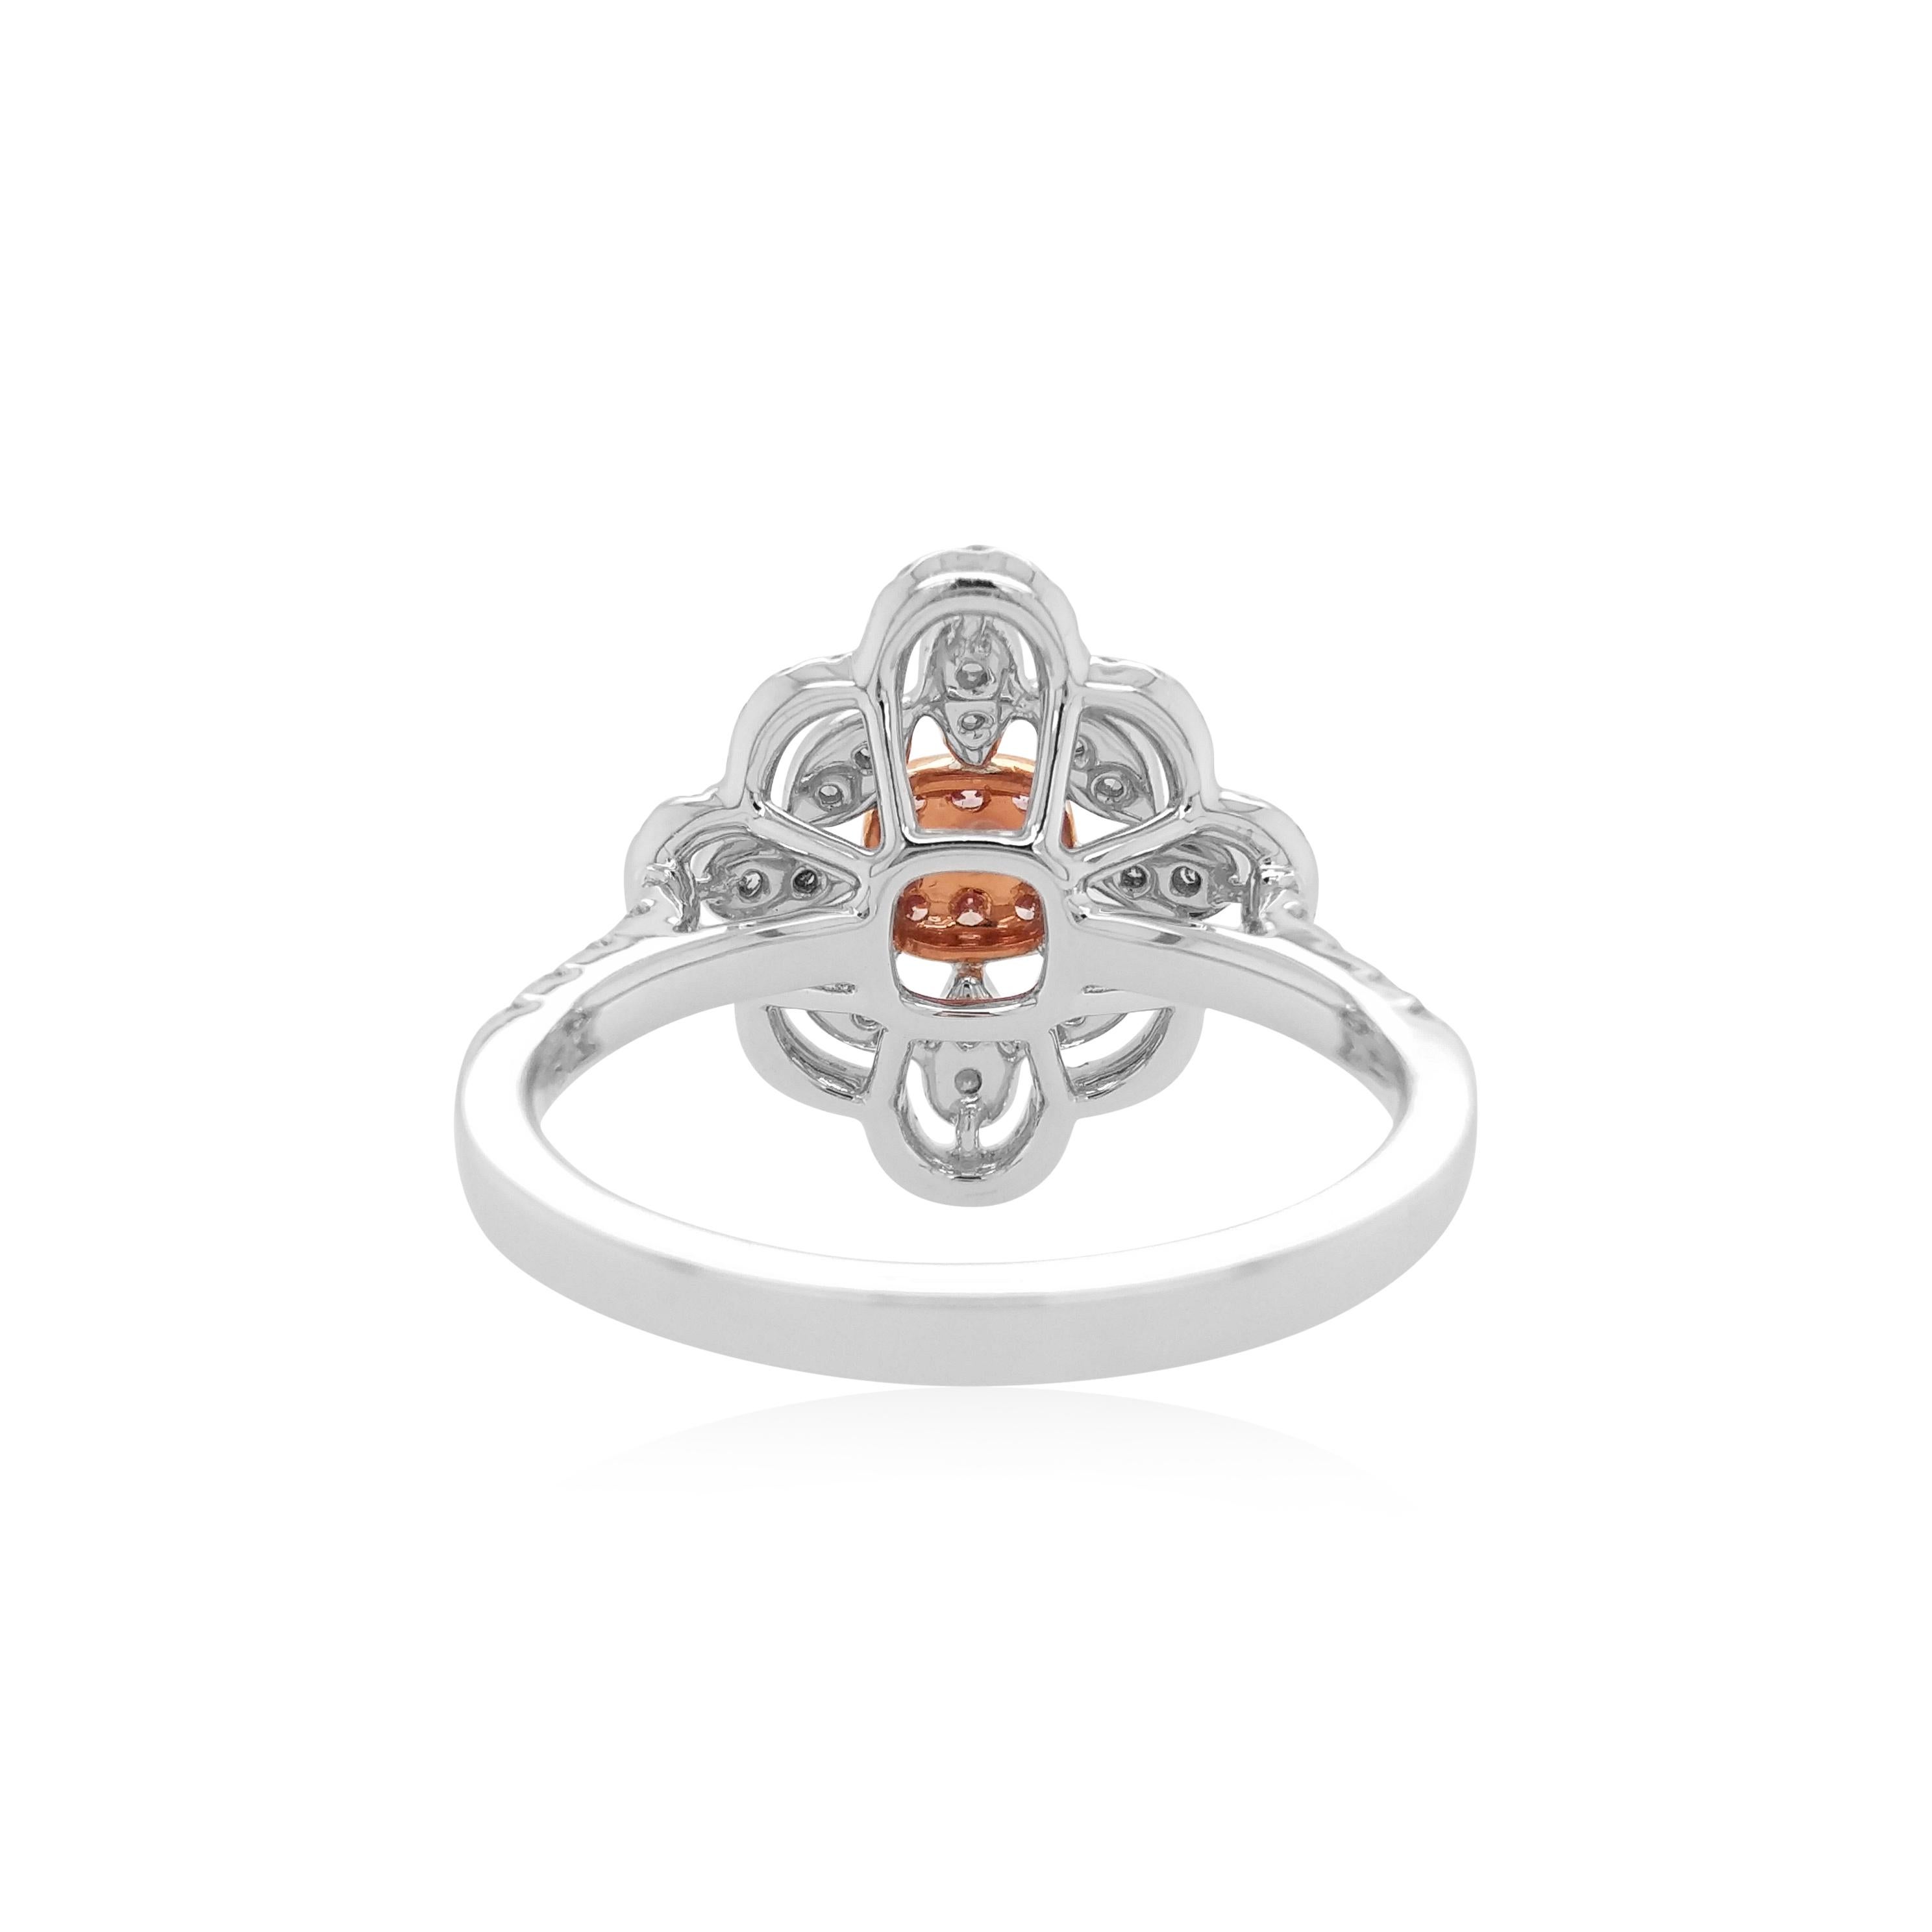 This exclusive cocktail ring features luscious natural Argyle pink diamonds at the heart of the design, by framing an ornate arrangement of white diamonds set in platinum. Bold and striking this unique ring is the perfect statement piece. Each